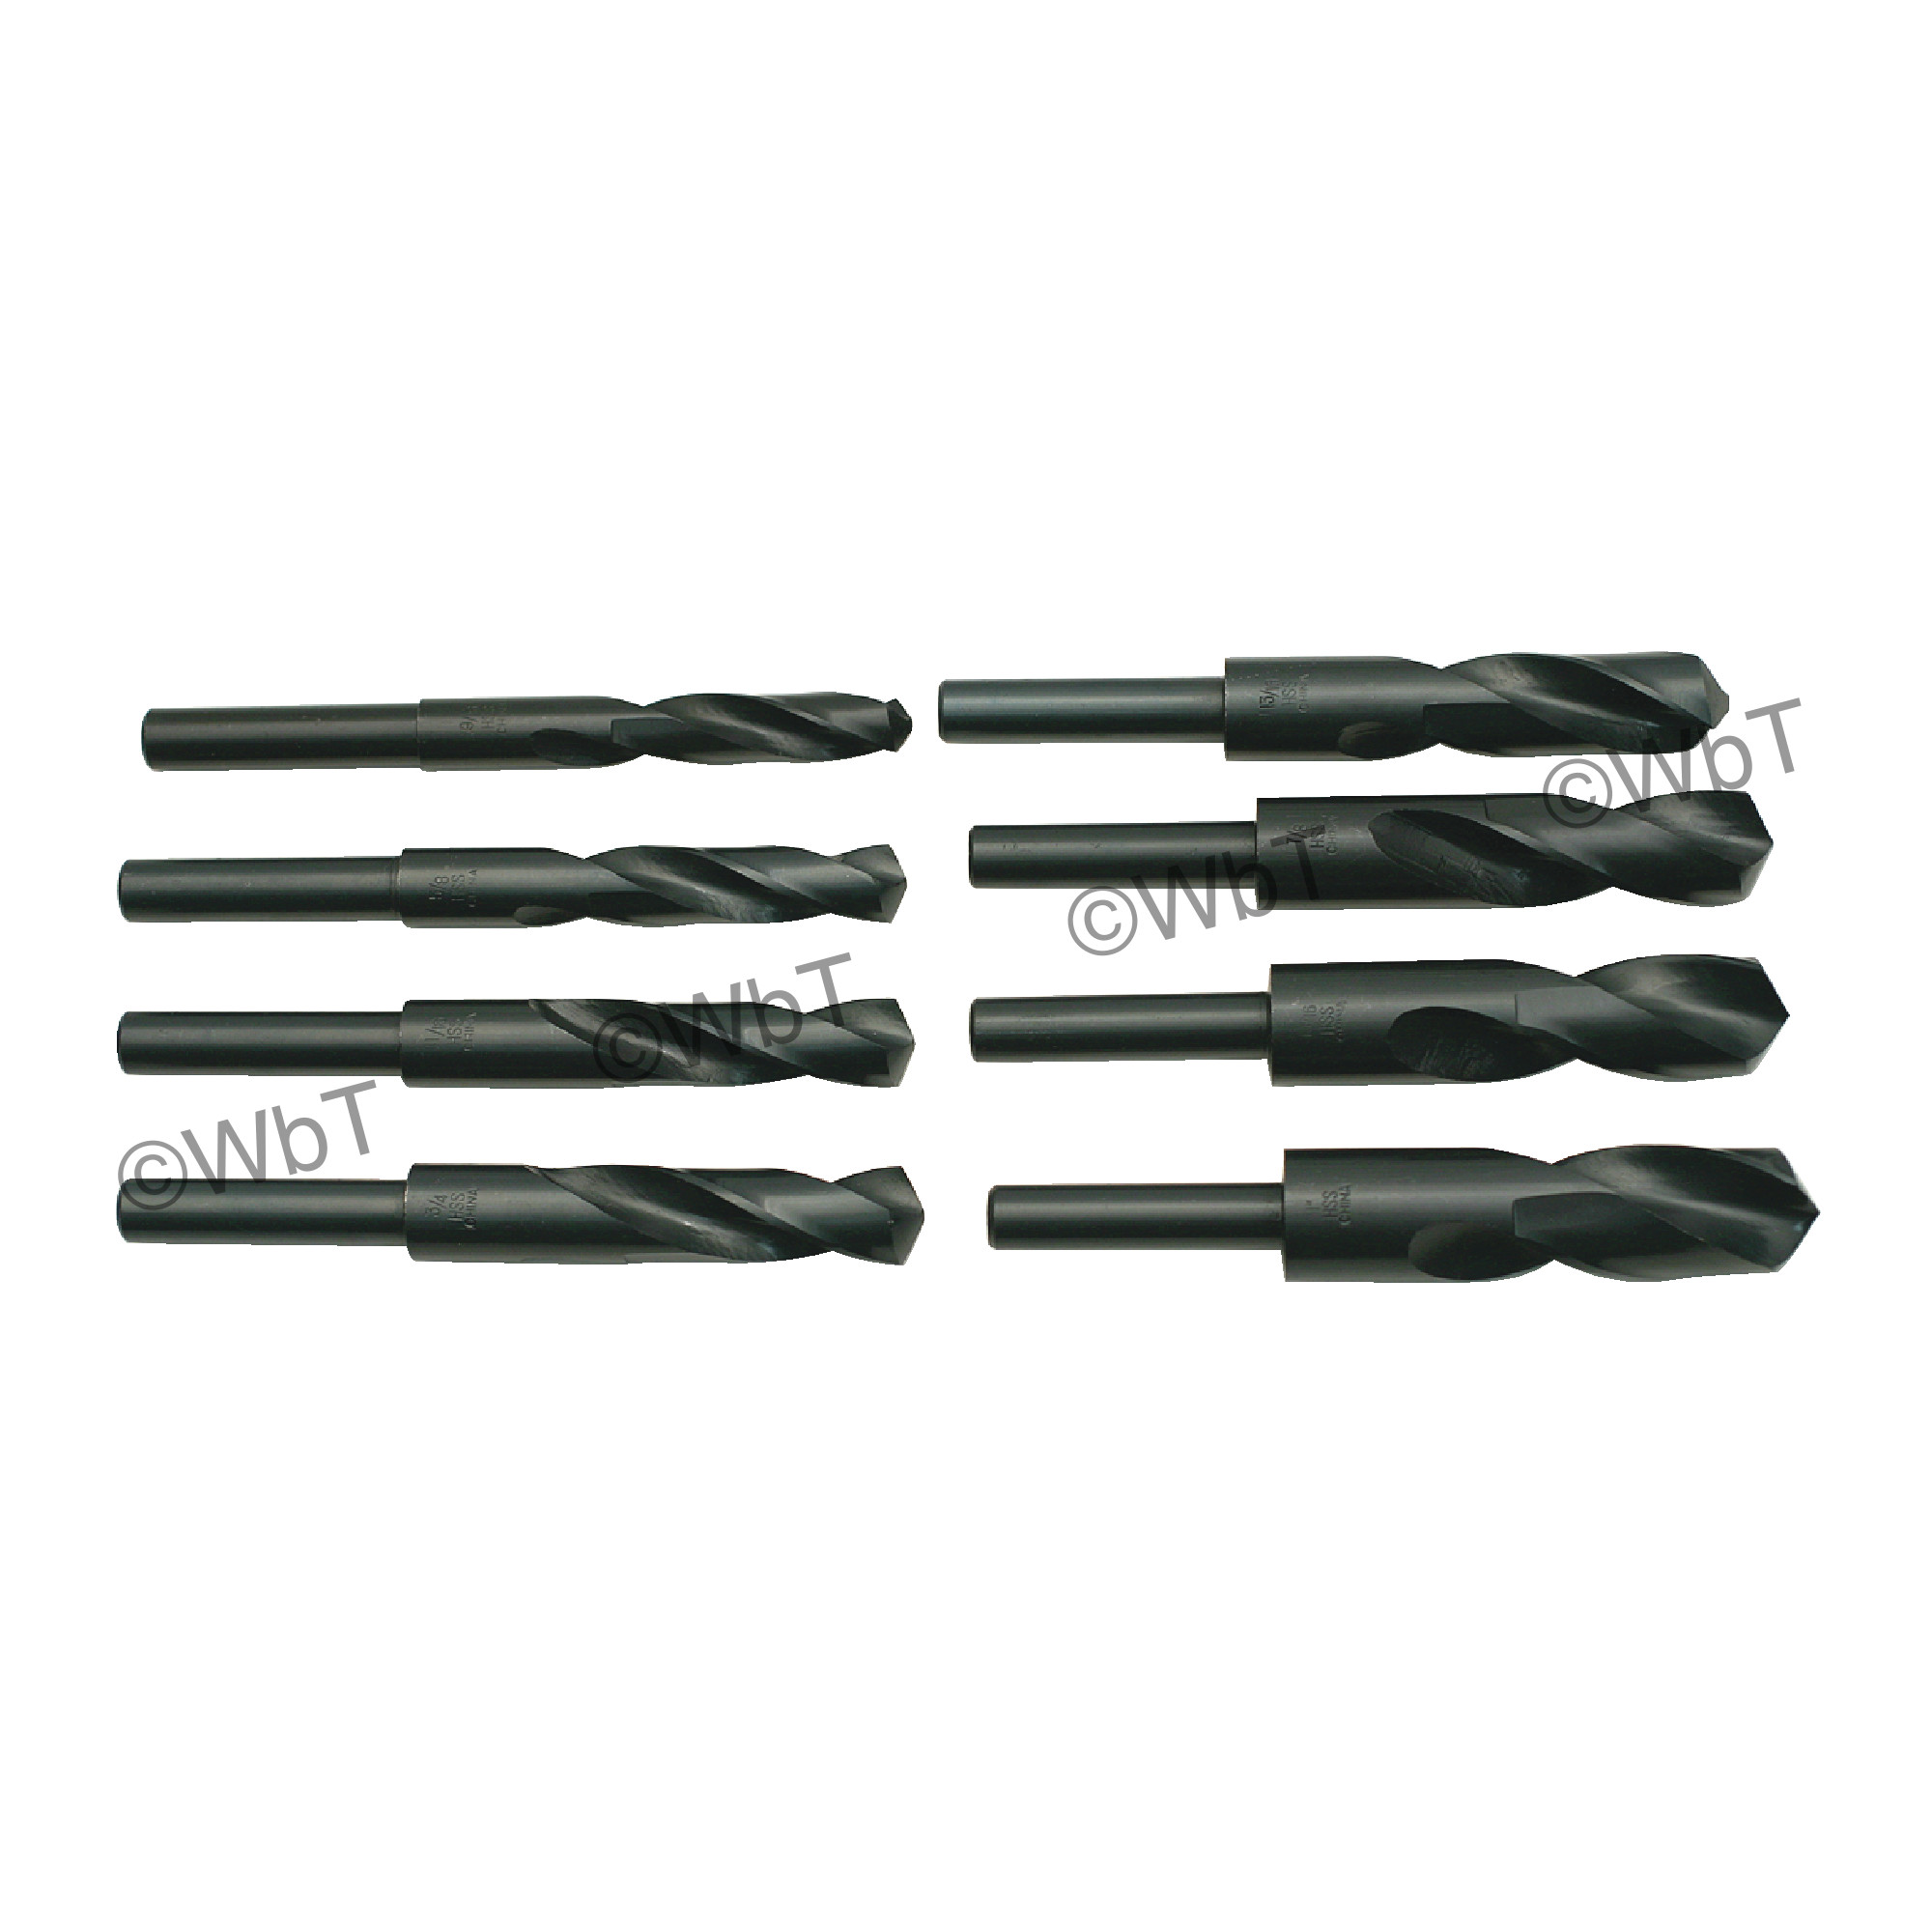 High Speed Steel Or Cobalt Silver & Deming Drill Sets